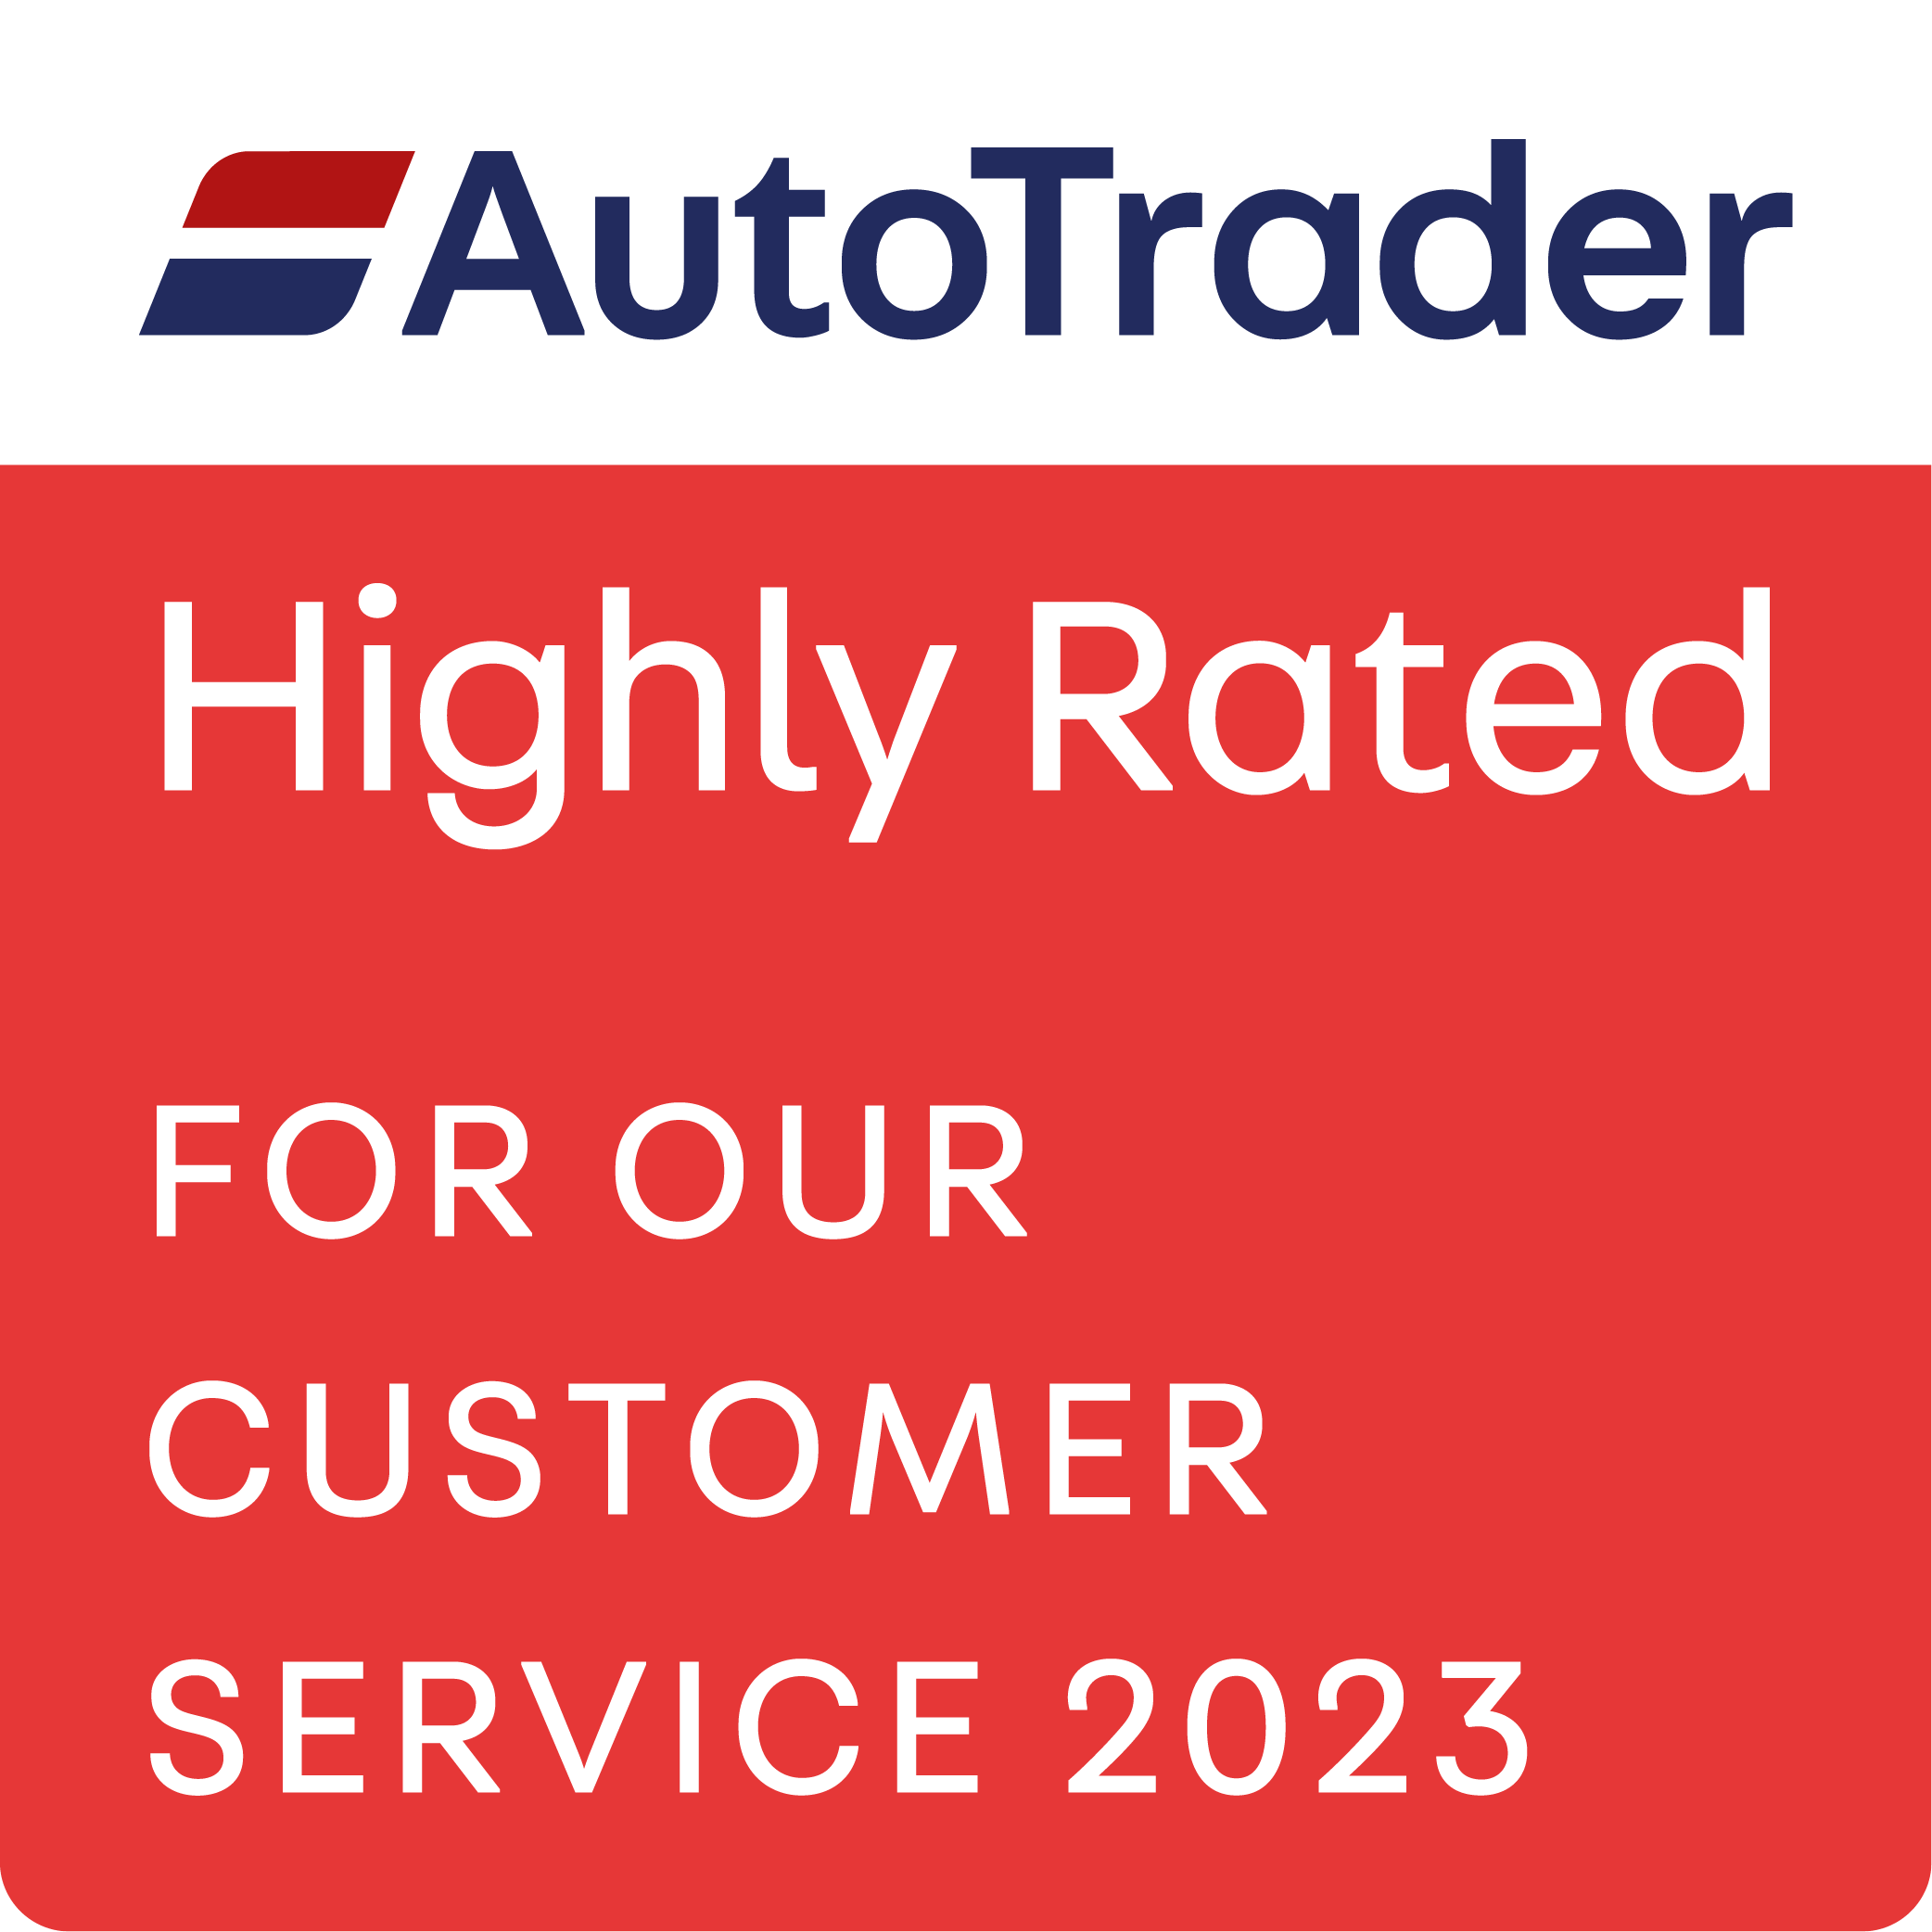 Highly rated by Autotrader for the 7th year in a row : Simon Shield Cars